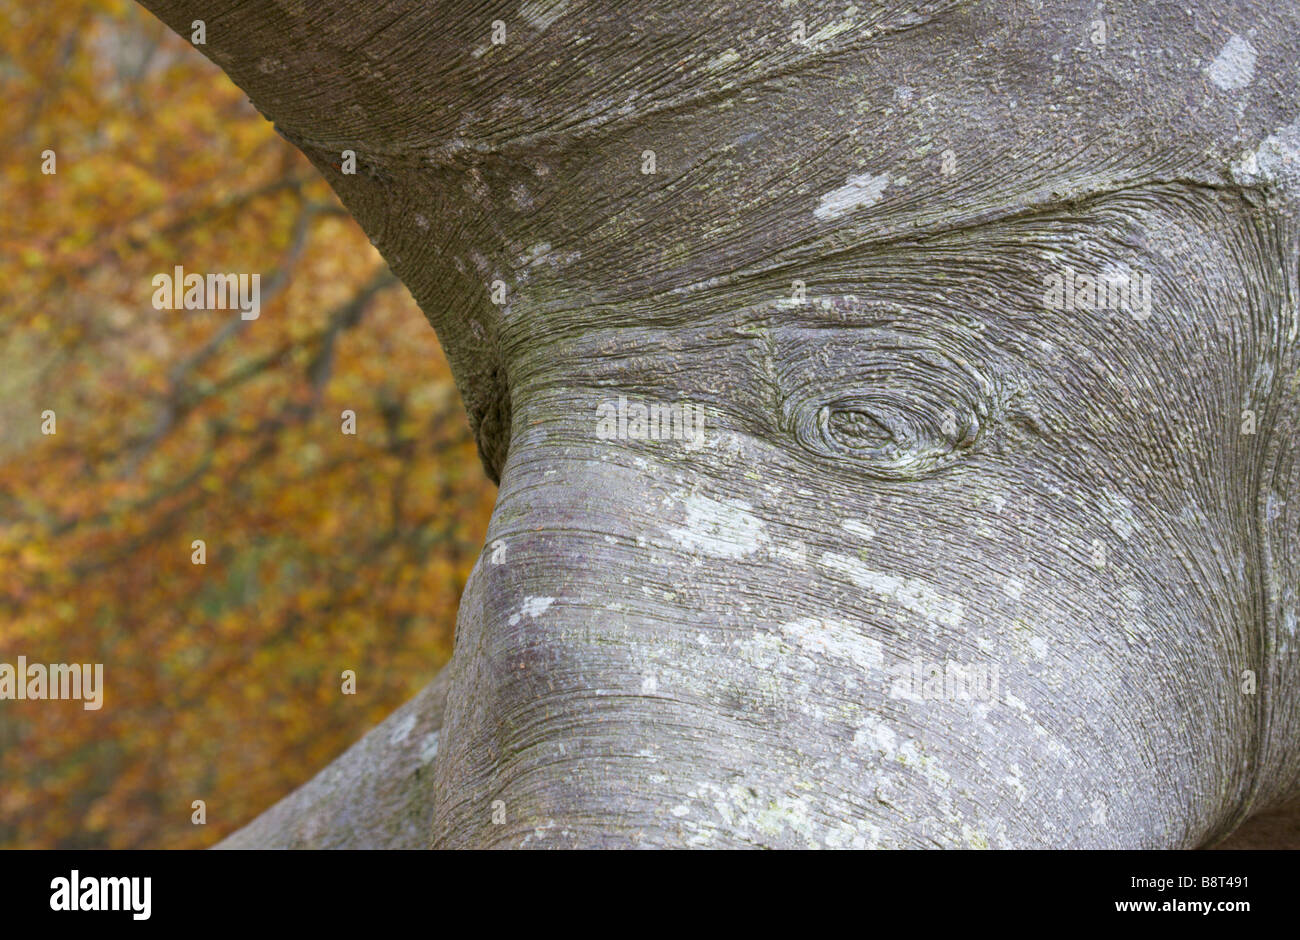 Beech tree trunk with colours and shapes resembling an elephant Stock Photo